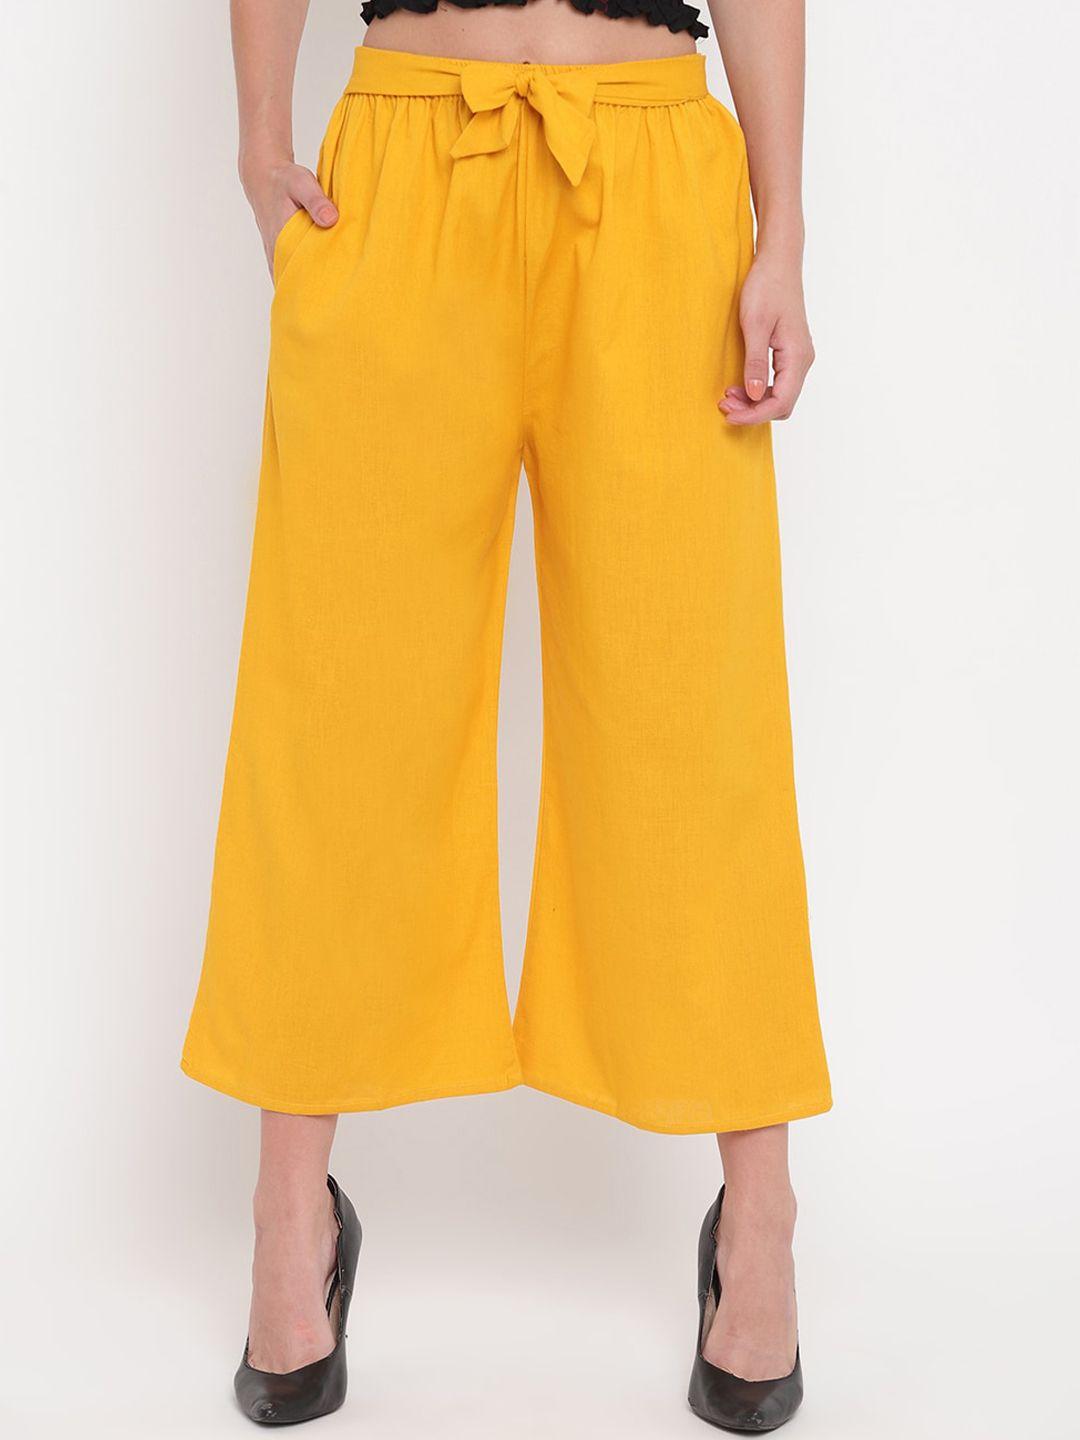 aawari women mustard yellow high-rise pleated cotton culottes trousers